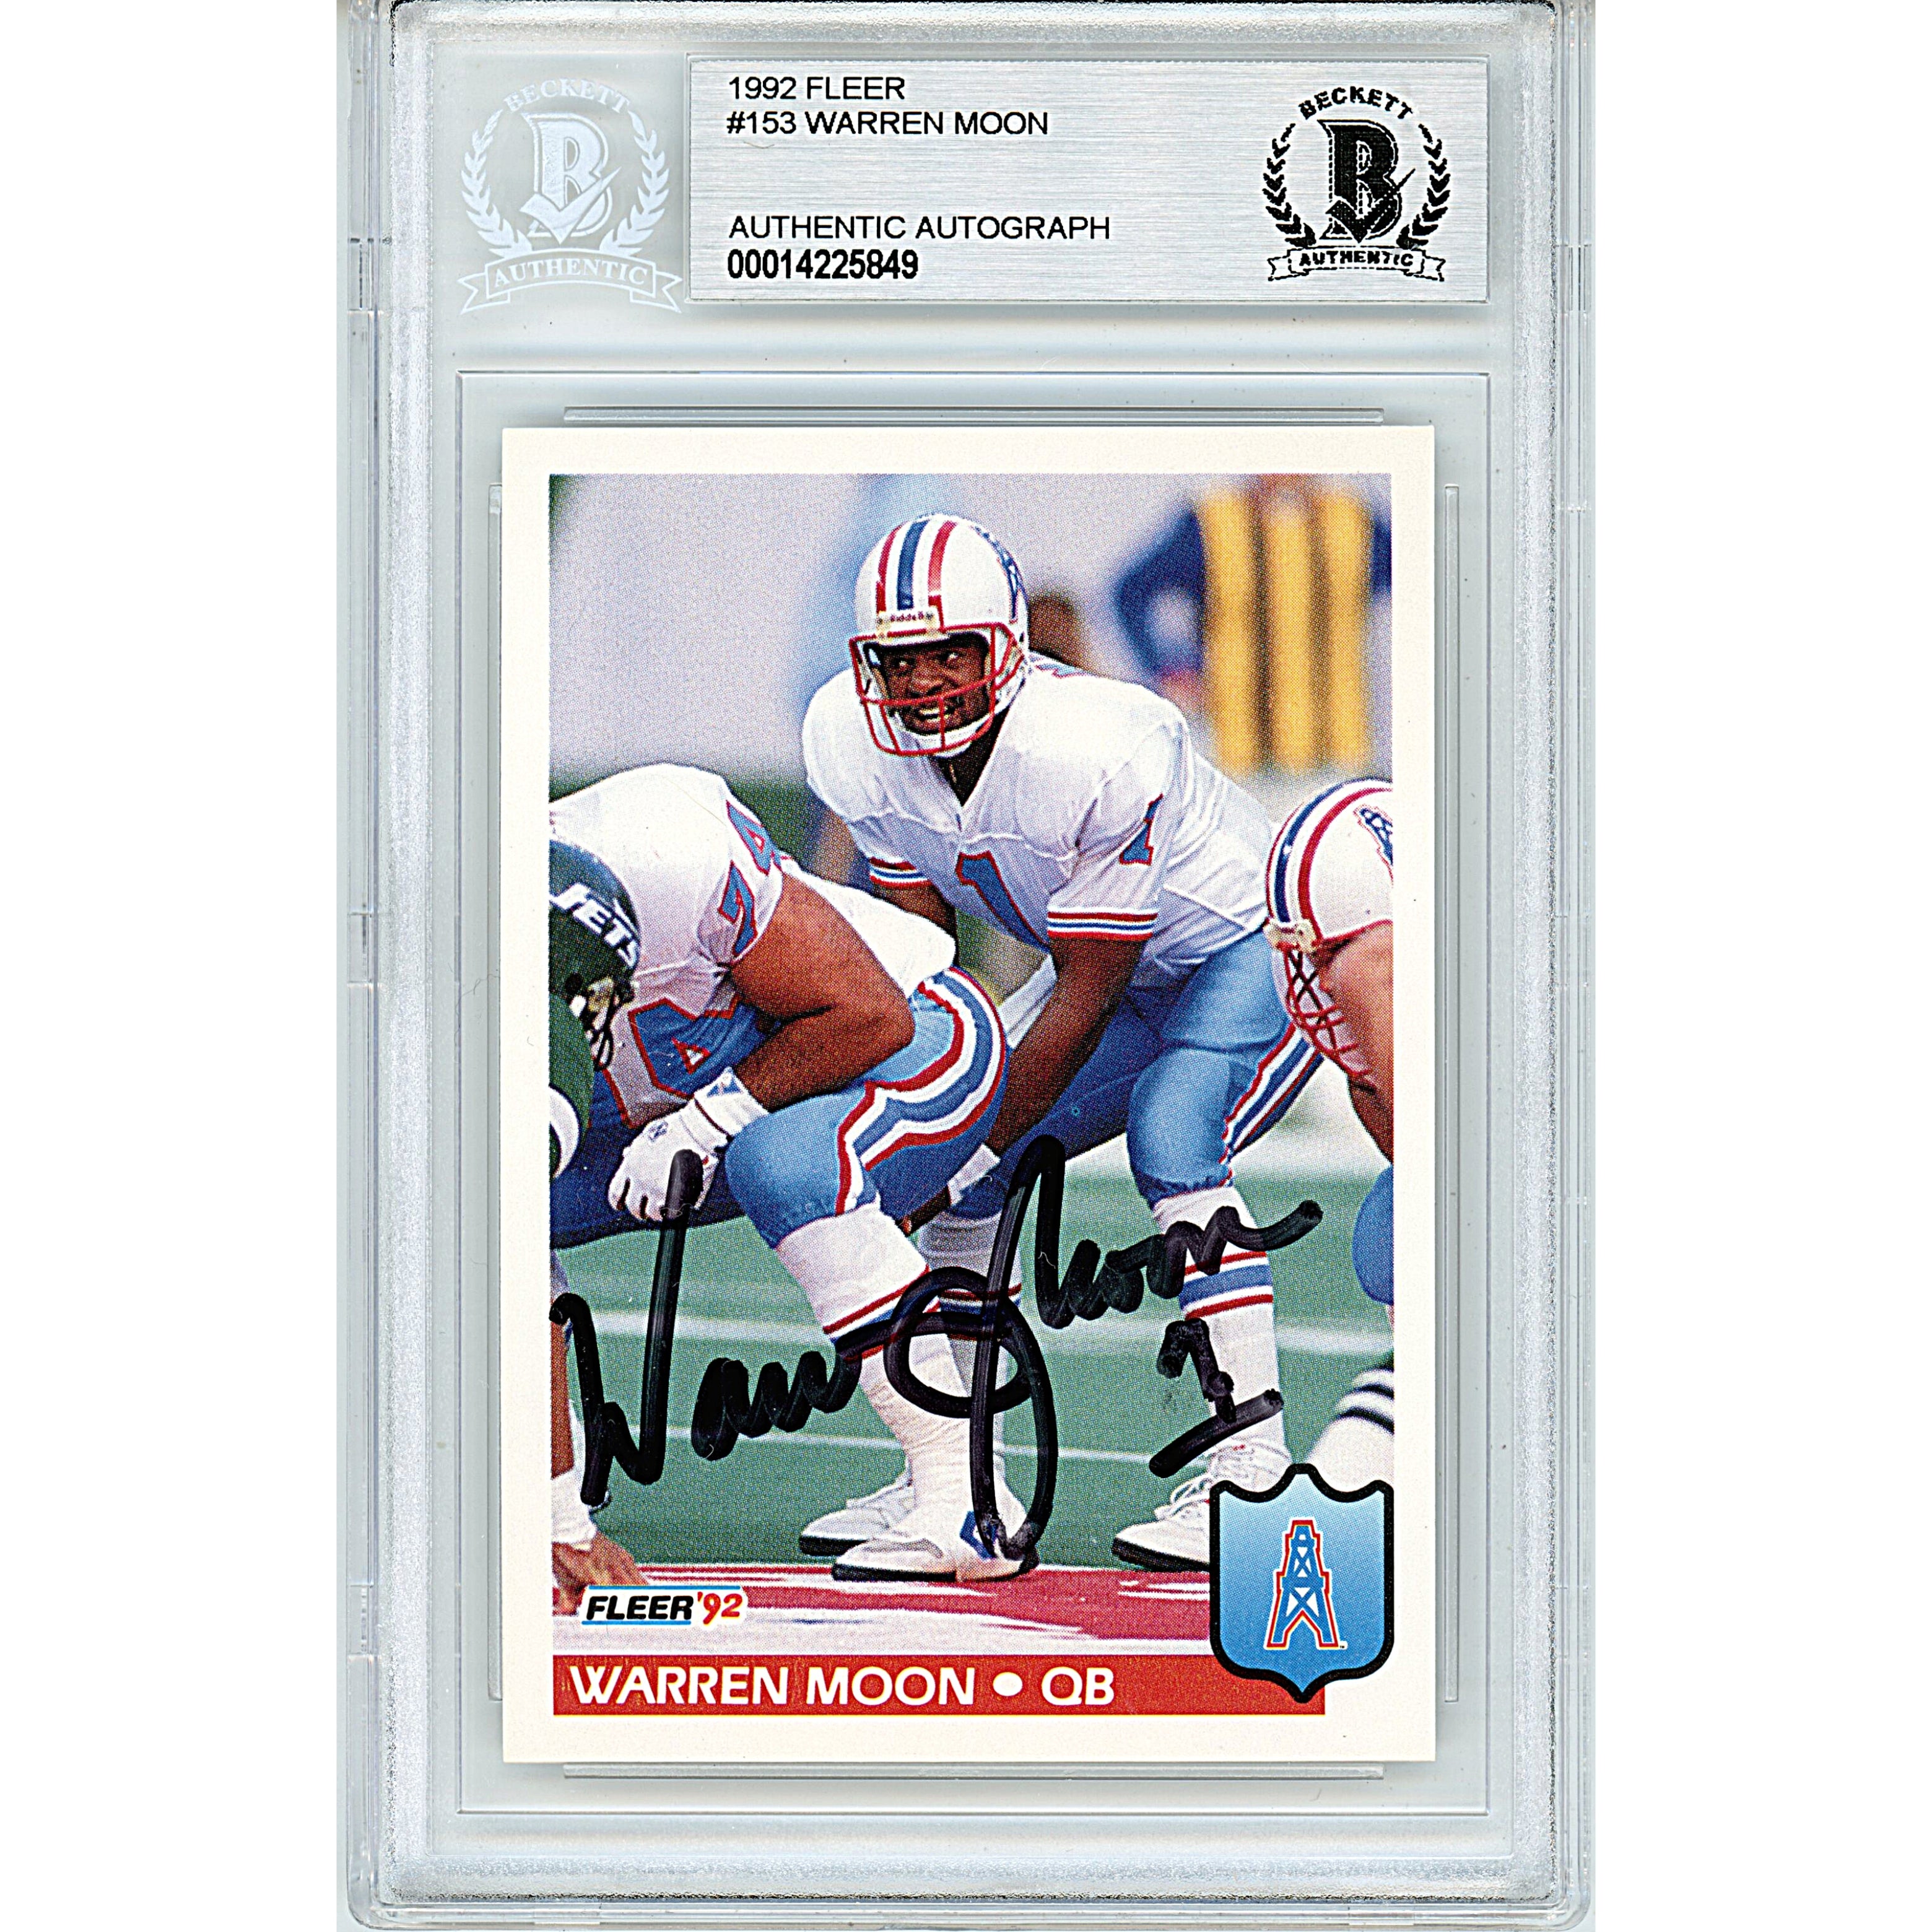 SIGNED WARREN MOON 2006 TOPPS HALL OF FAME FOOTBALL CARD AUTOGRAPH HOF  OILERS